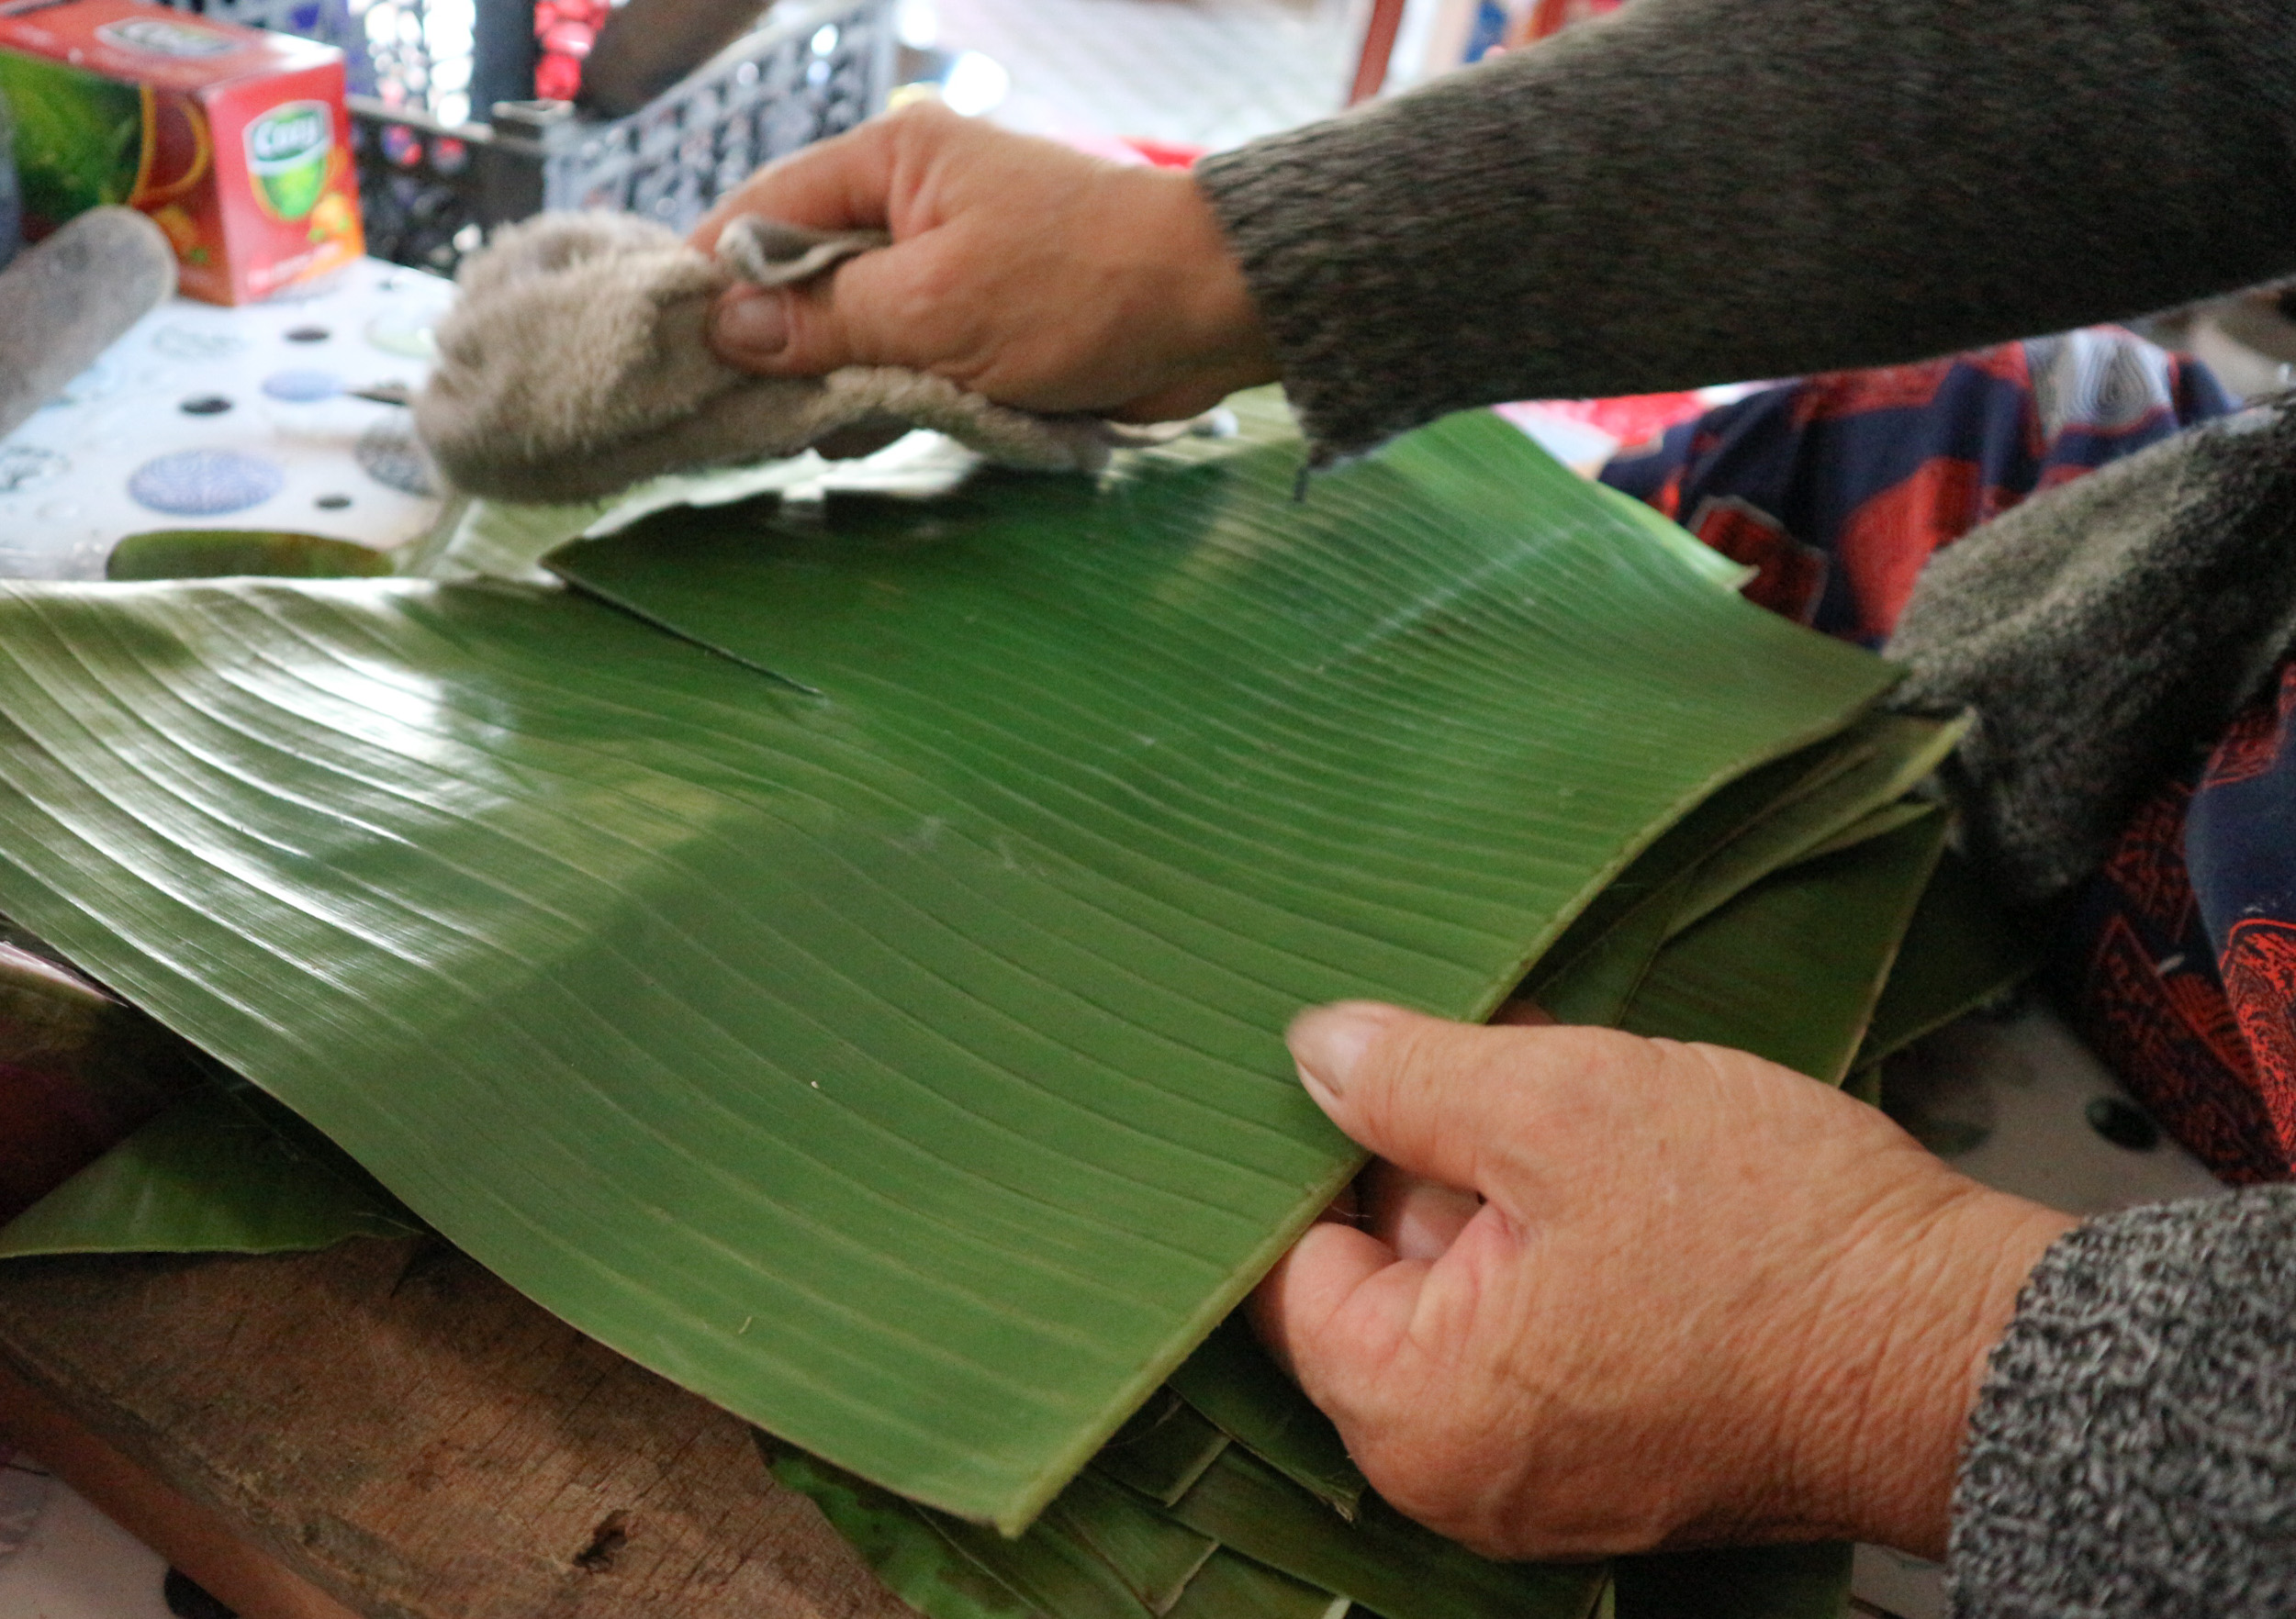 The banana leaves are cut into pieces and cleaned after they are scorched. Photo: Ngoc Phuong / Tuoi Tre News